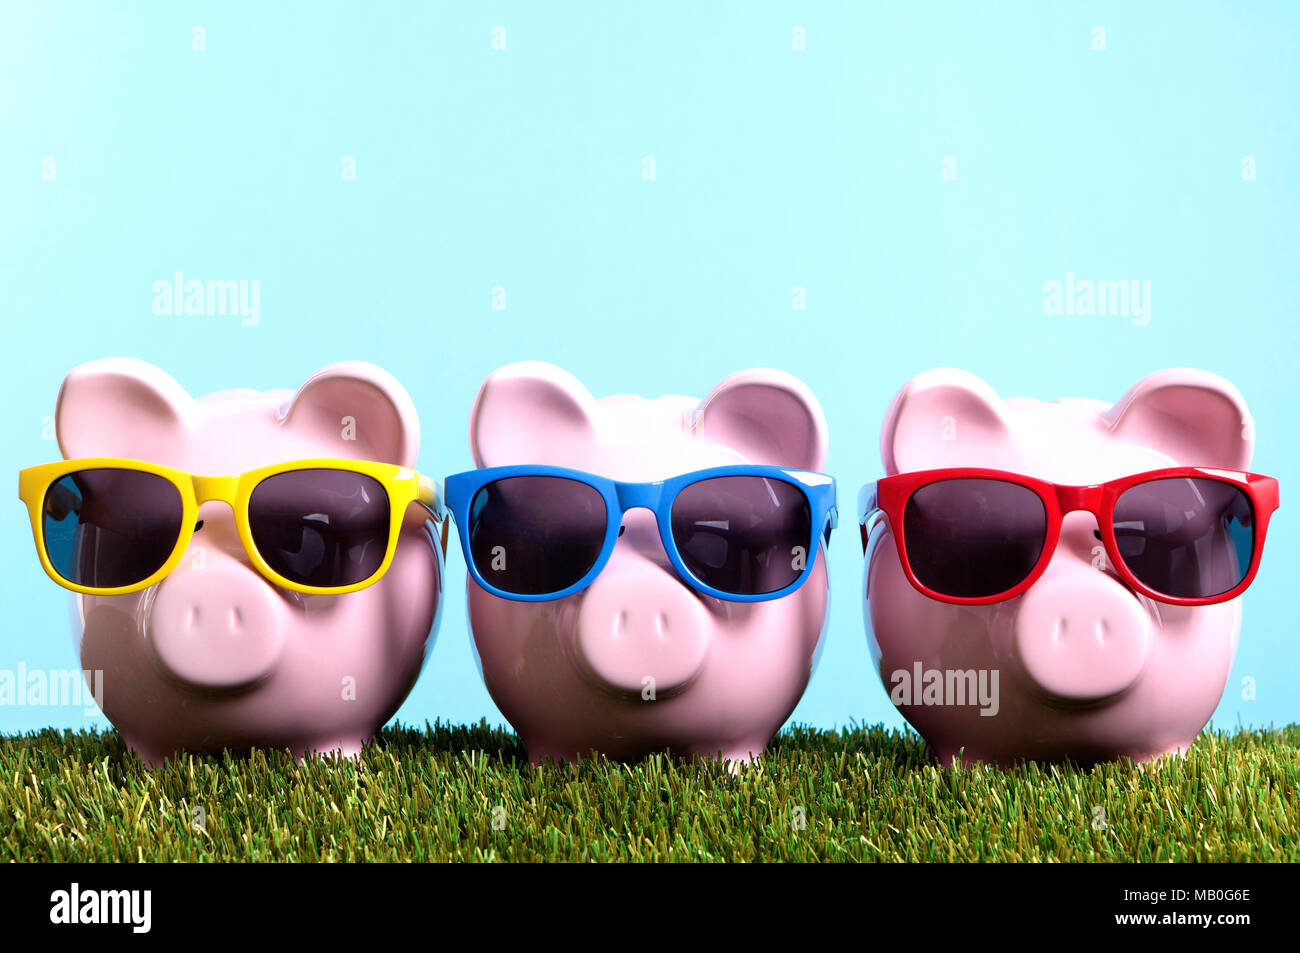 Three pink piggy banks with sunglasses on grass with blue sky.  Studio shot with plain blue background. Stock Photo